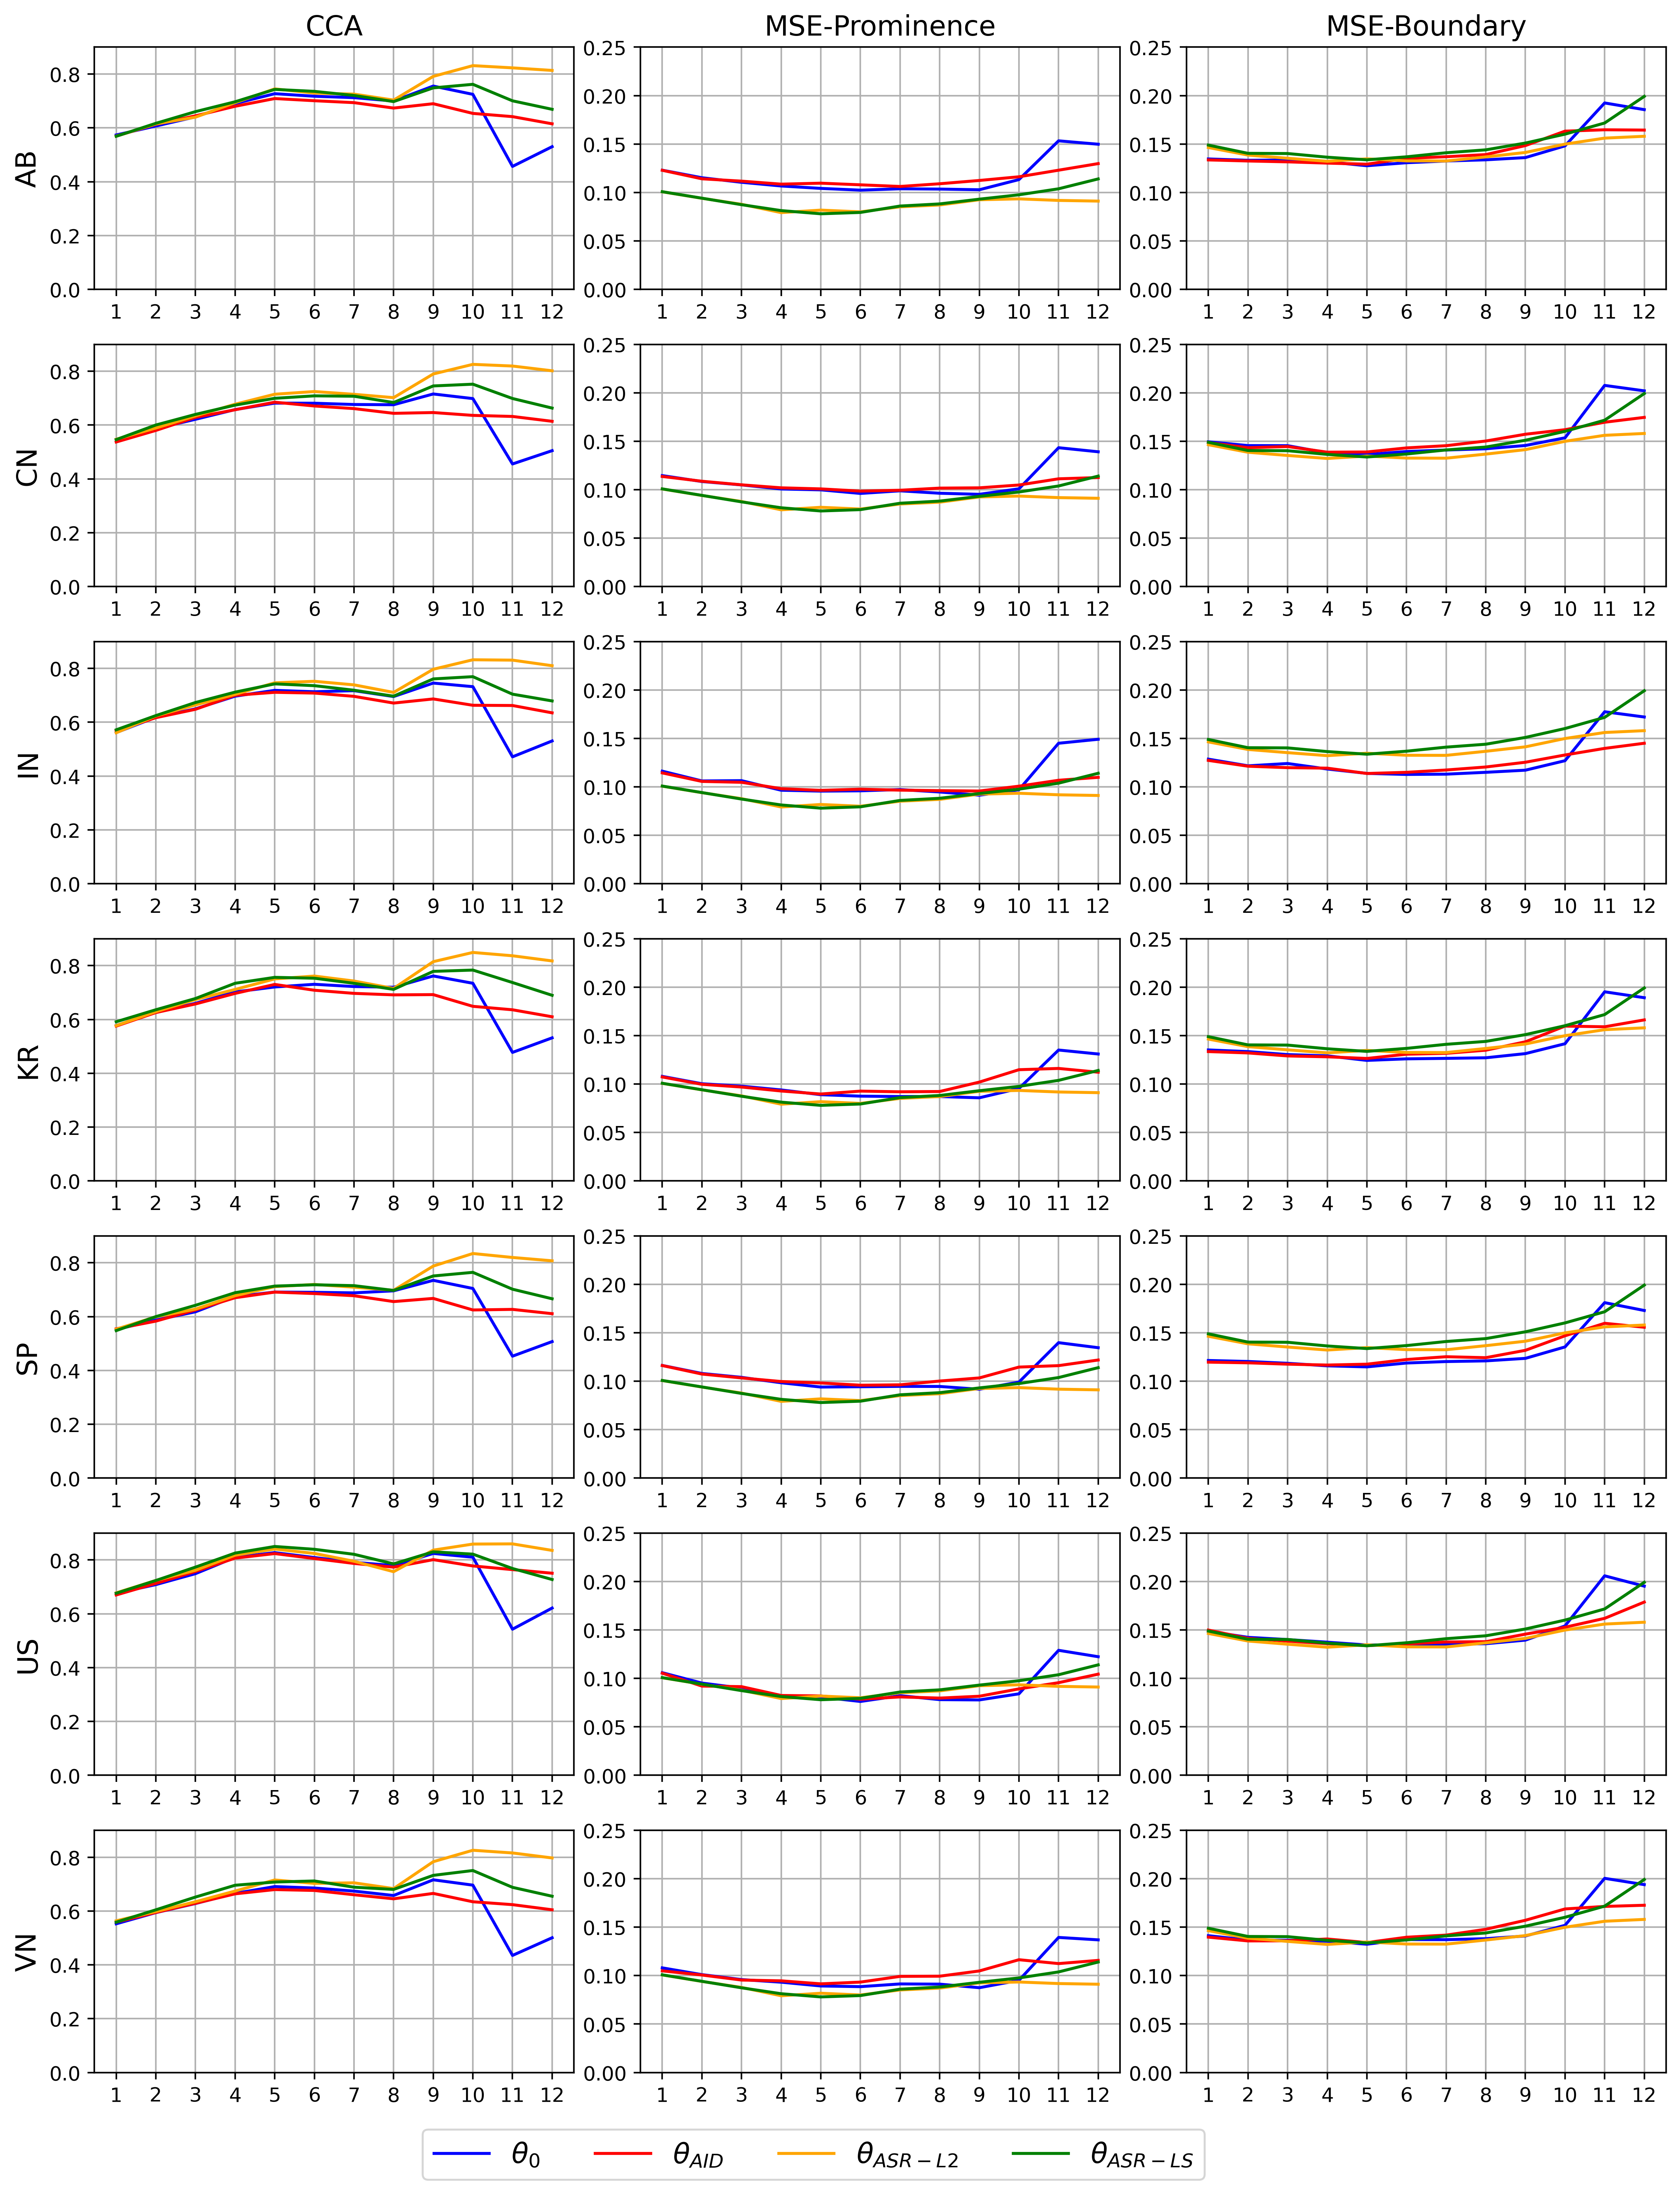 plots/all_curves.png